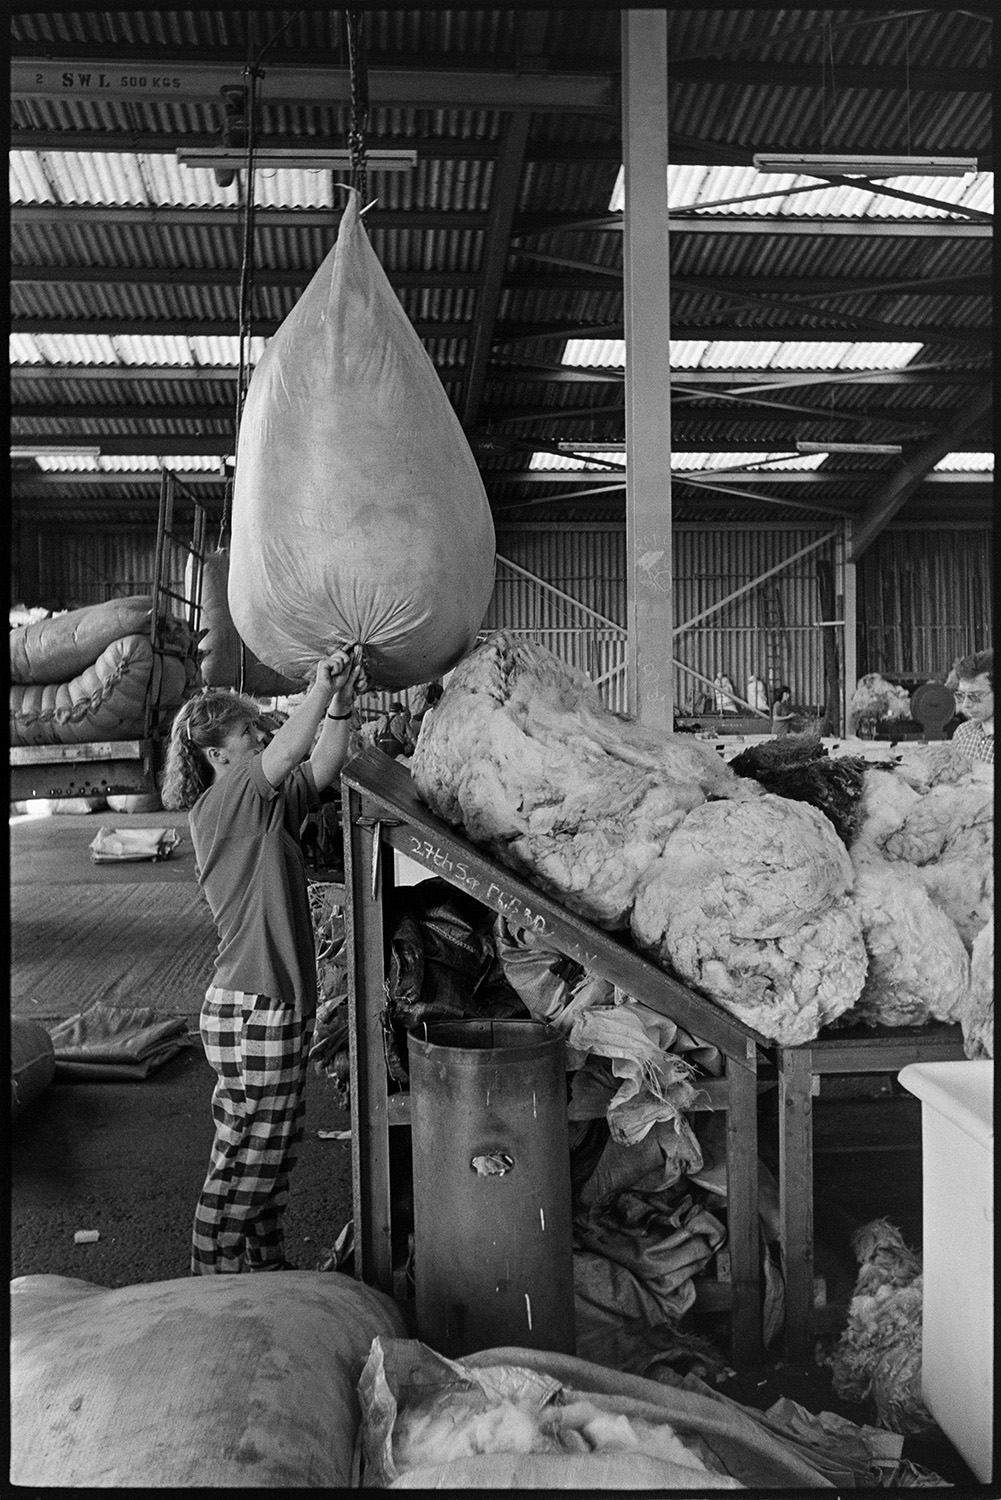 A woman opening a bag of wool which is suspended from a hoist, in the warehouse of Devon & Cornwall Wools Ltd at the Pathfields Business Park in South Molton.